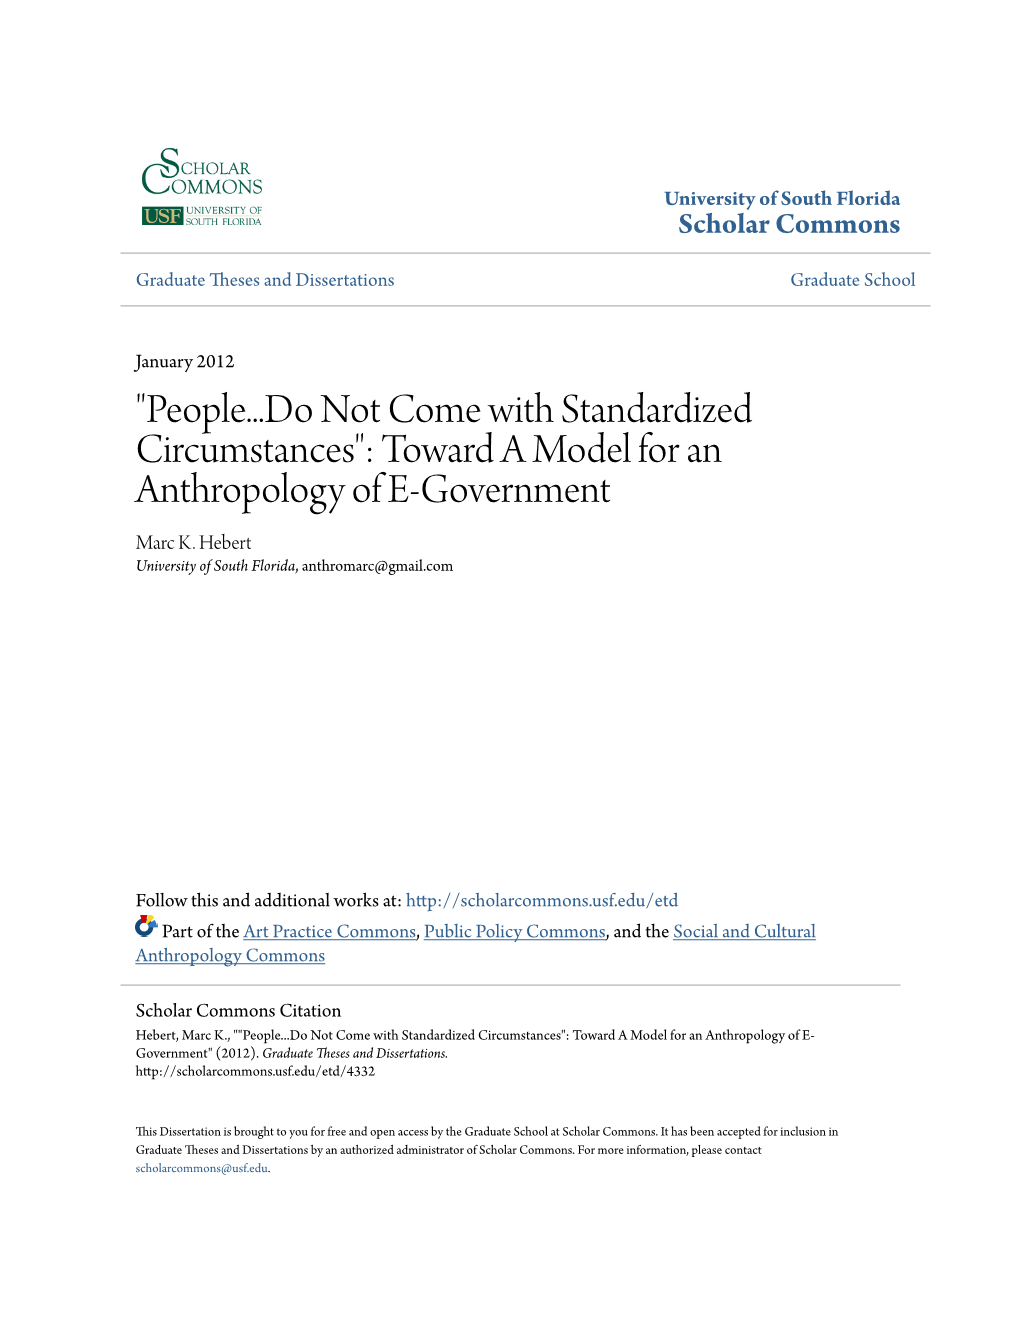 Toward a Model for an Anthropology of E-Government Marc K